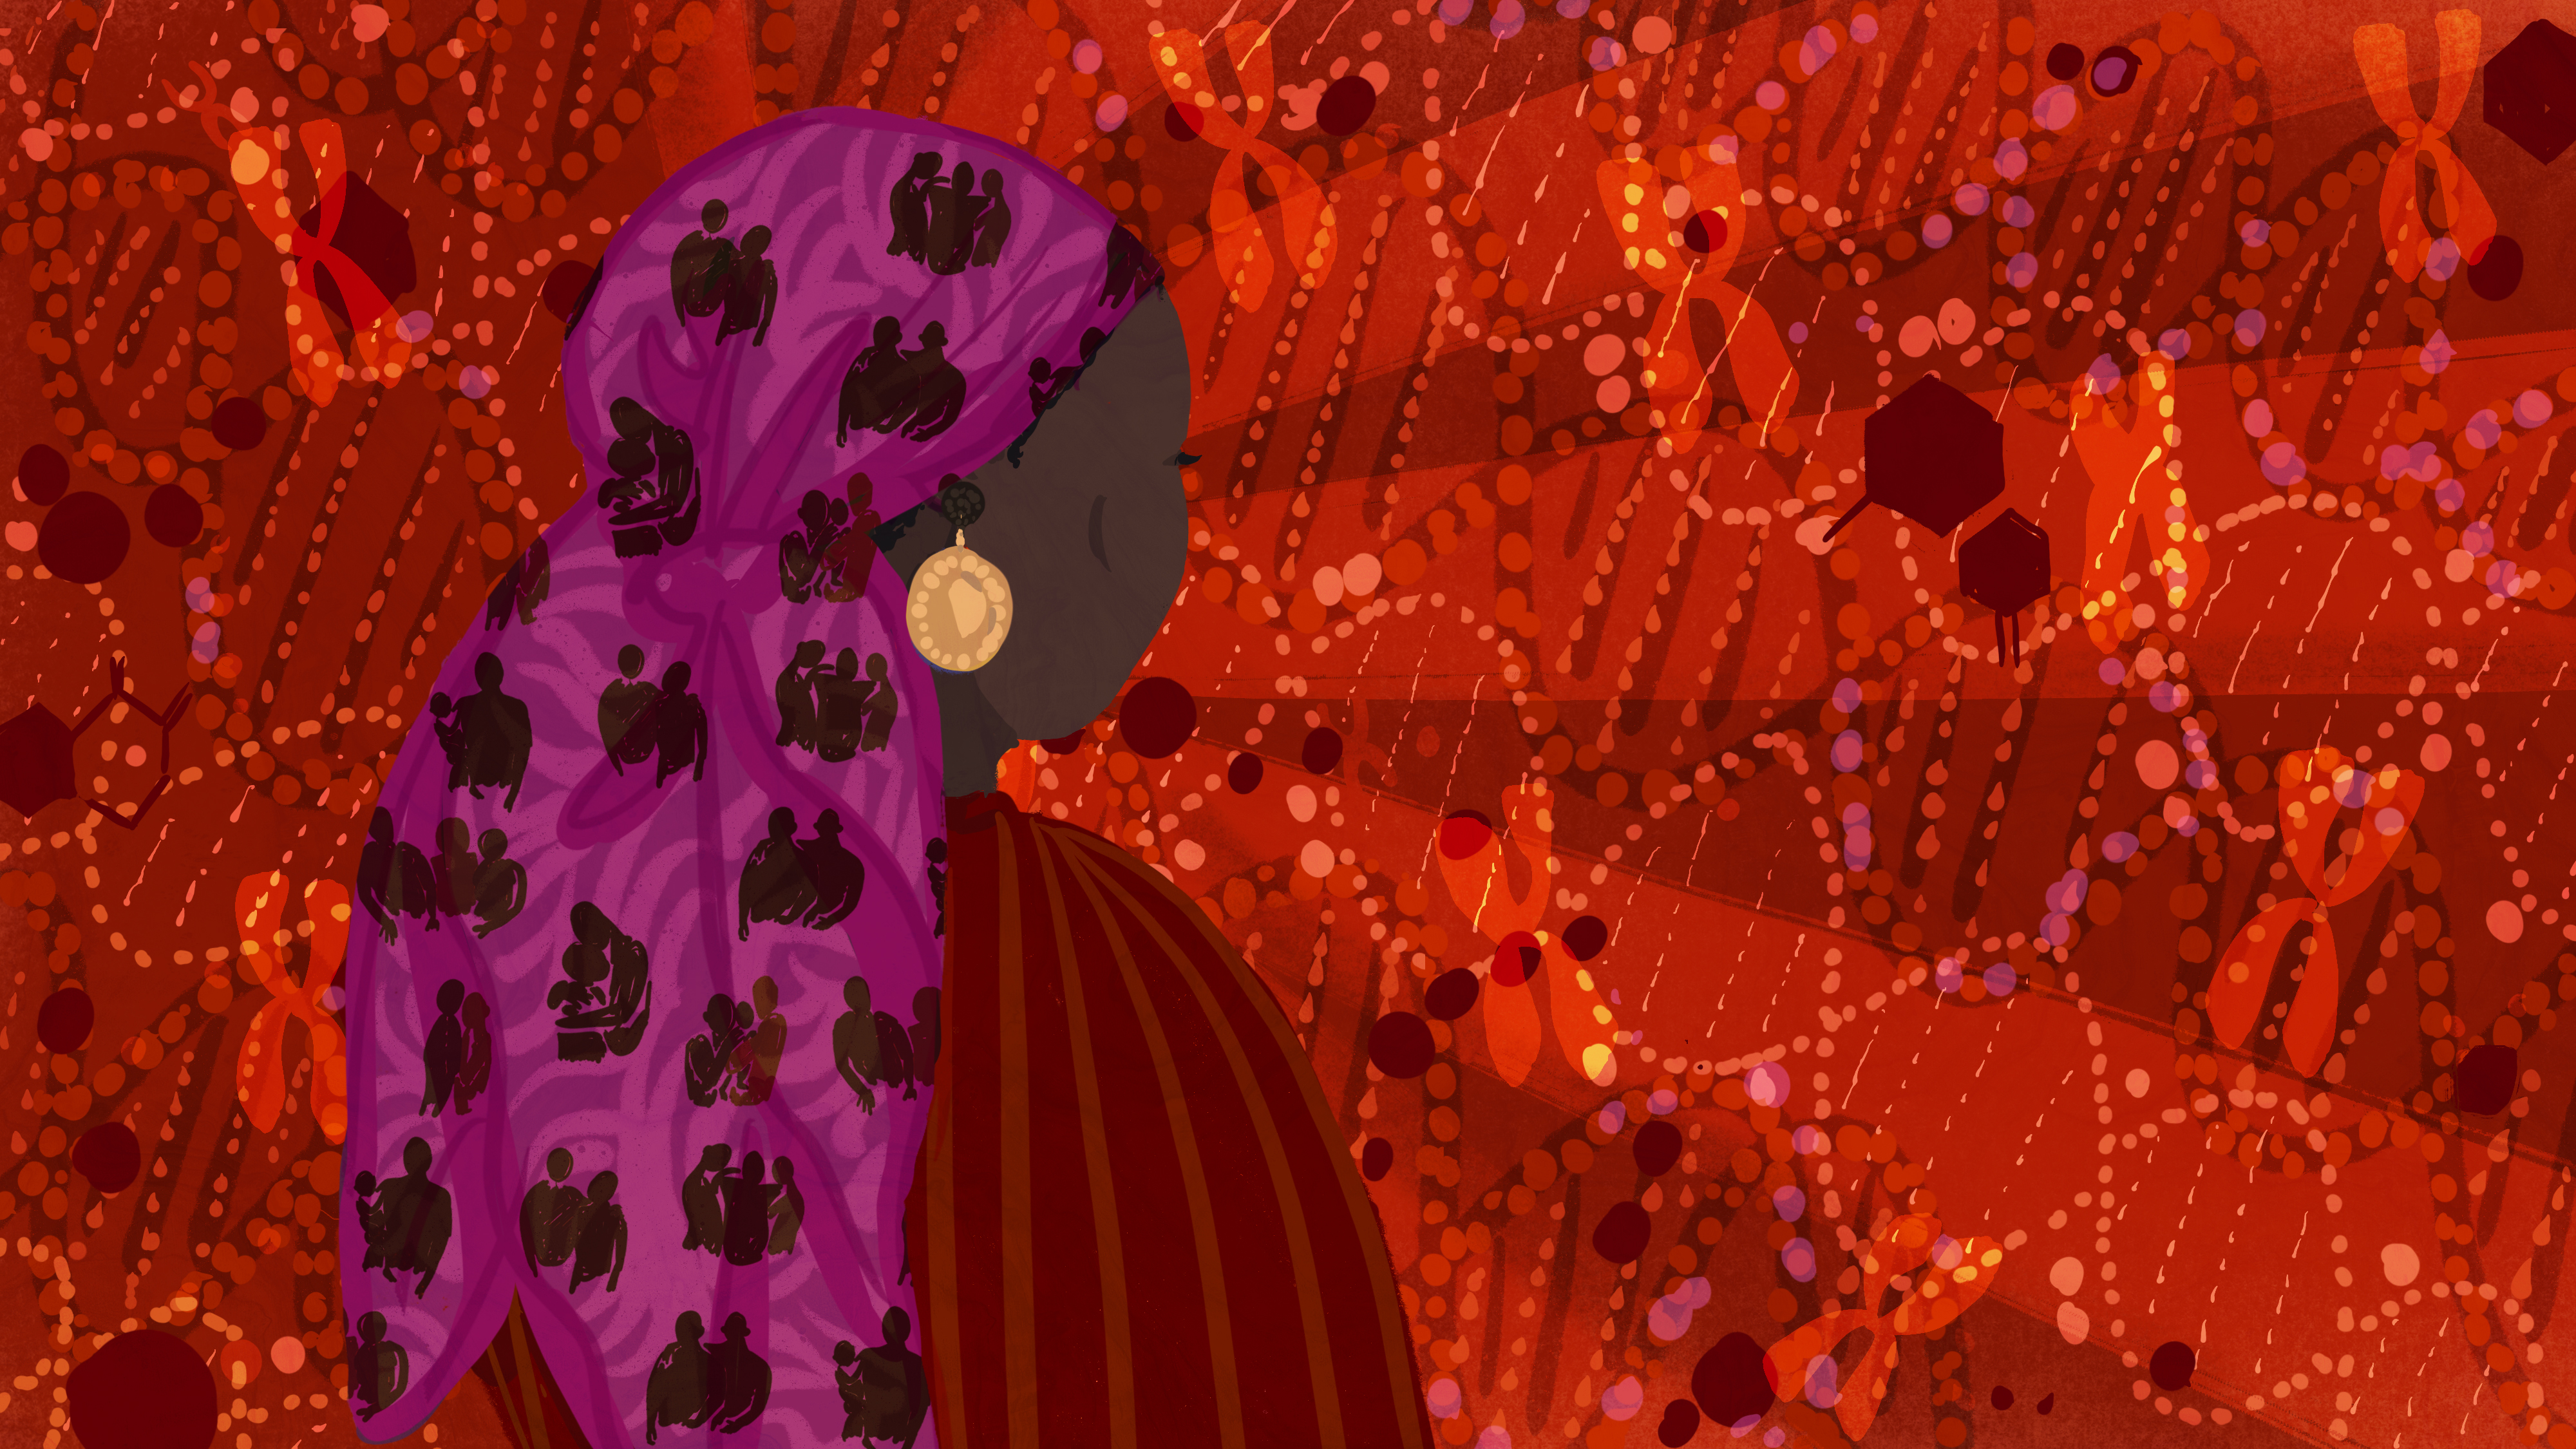 An illustration of a black woman, with a viewpoint looking over her right shoulder. She is wearing a headscarf depicting family groups and in the background are representations of DNA strands and chromosomes.